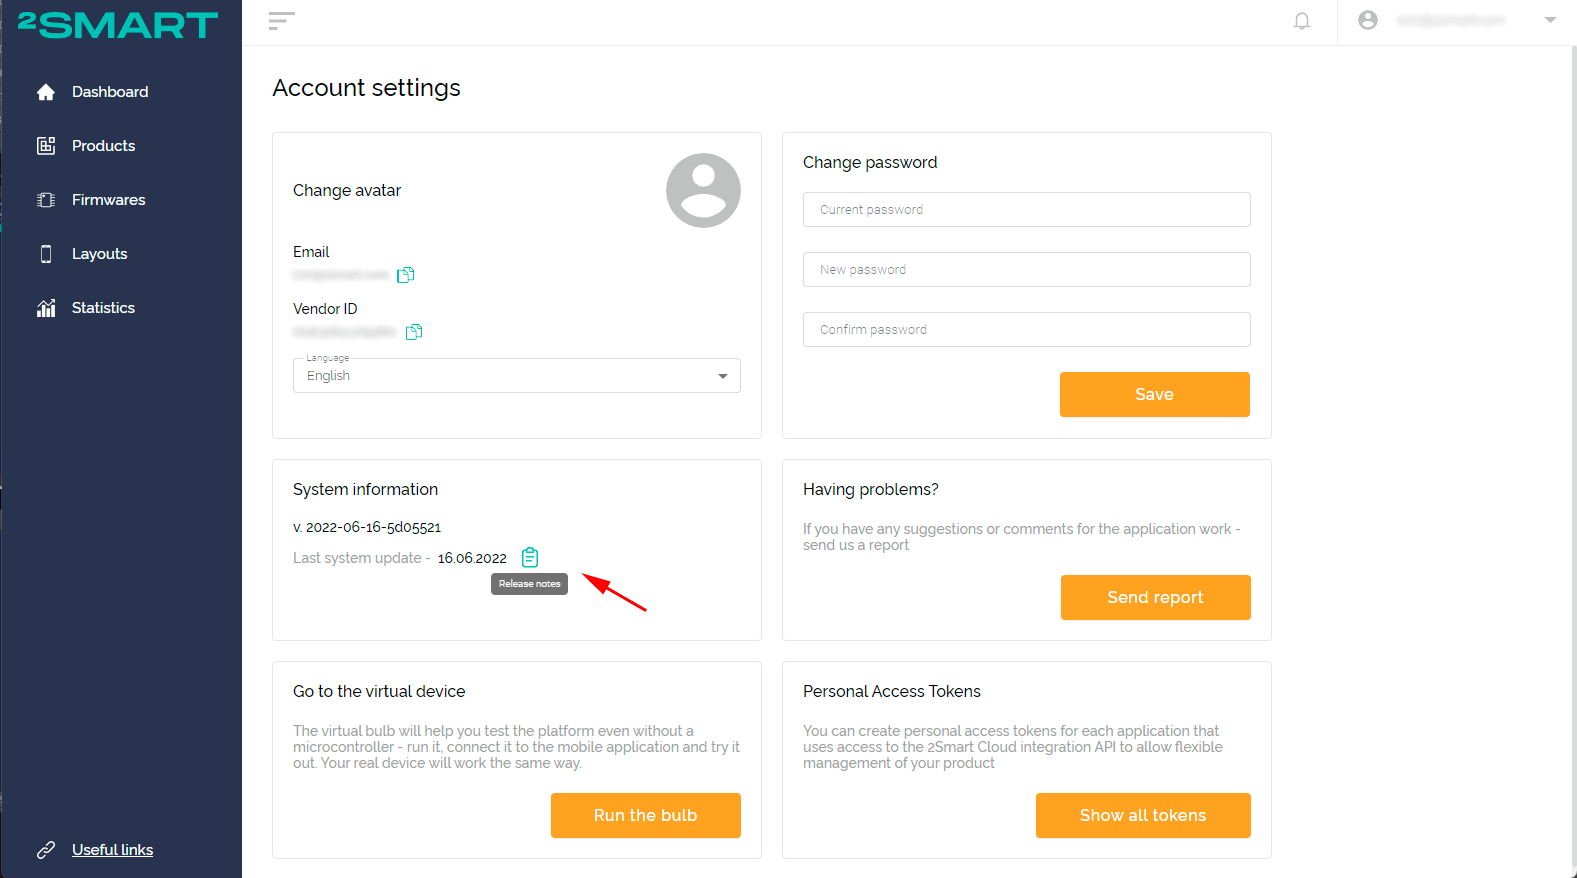 The Account settings section